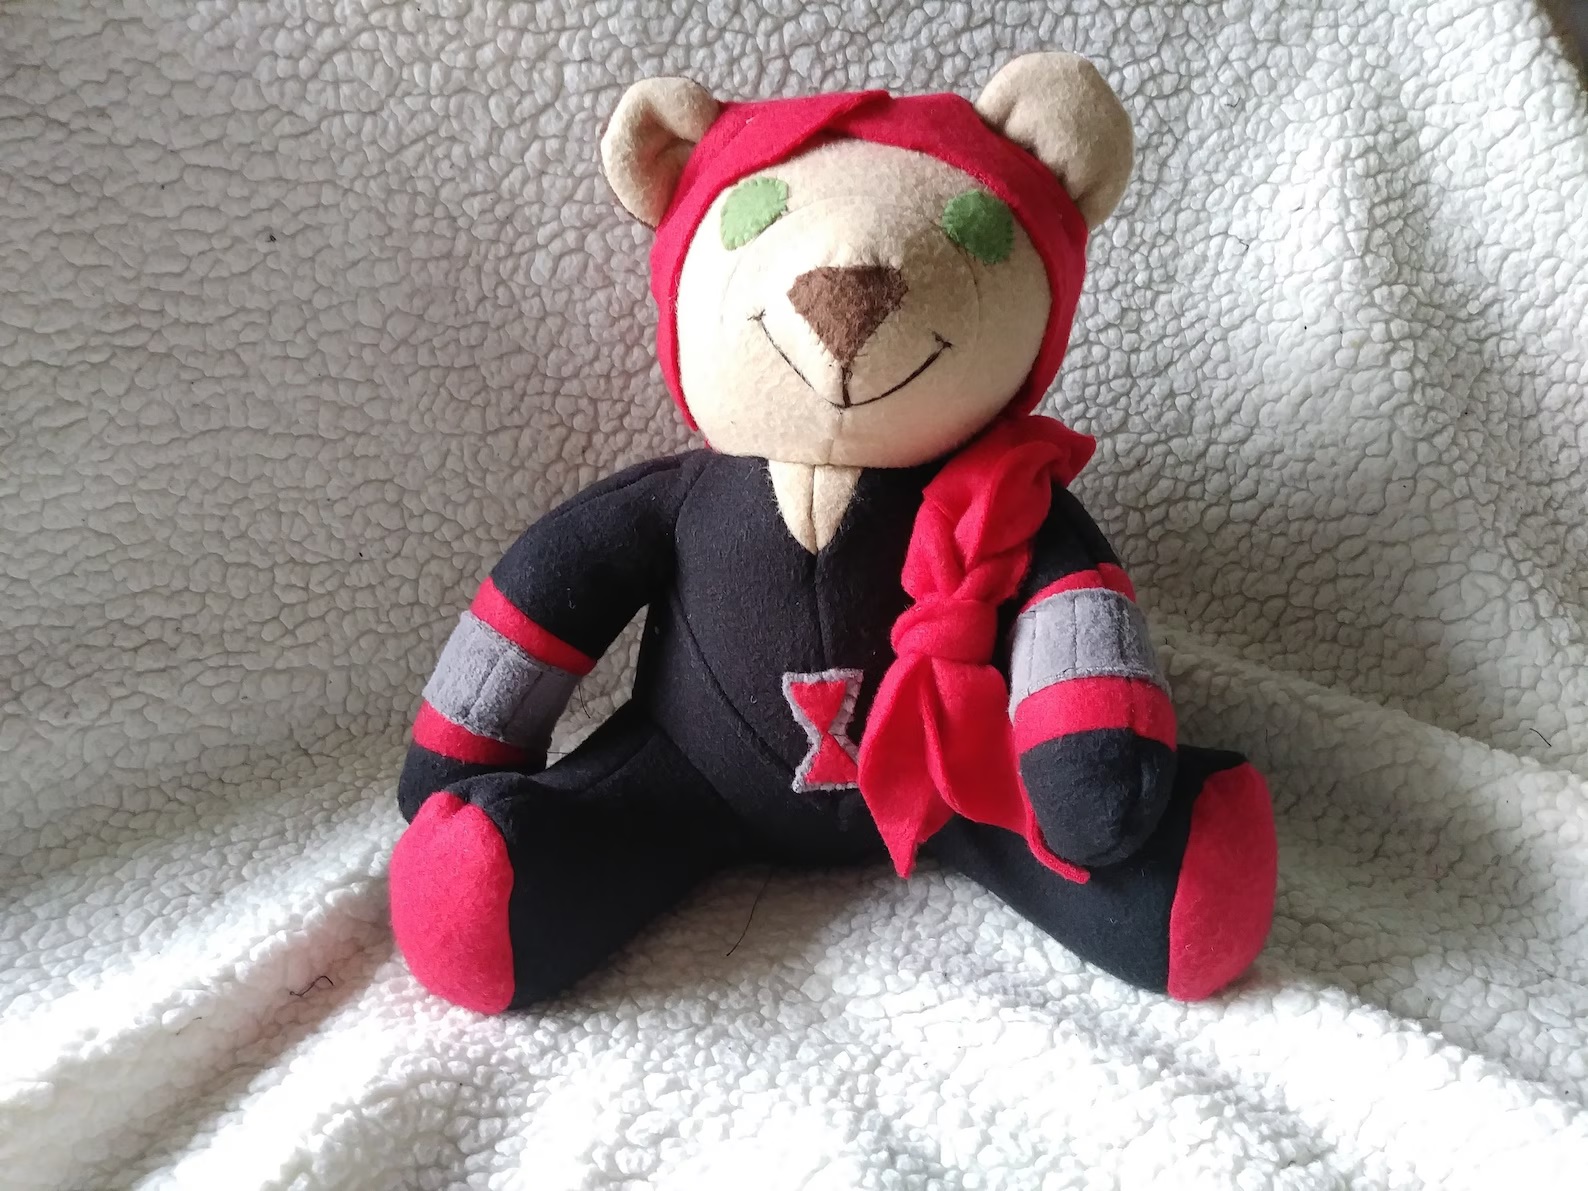 A handmade, off-white teddy bear wearing Black Widow's costume and a red braided cloth for hair. It has green felt eyes and is smiling.